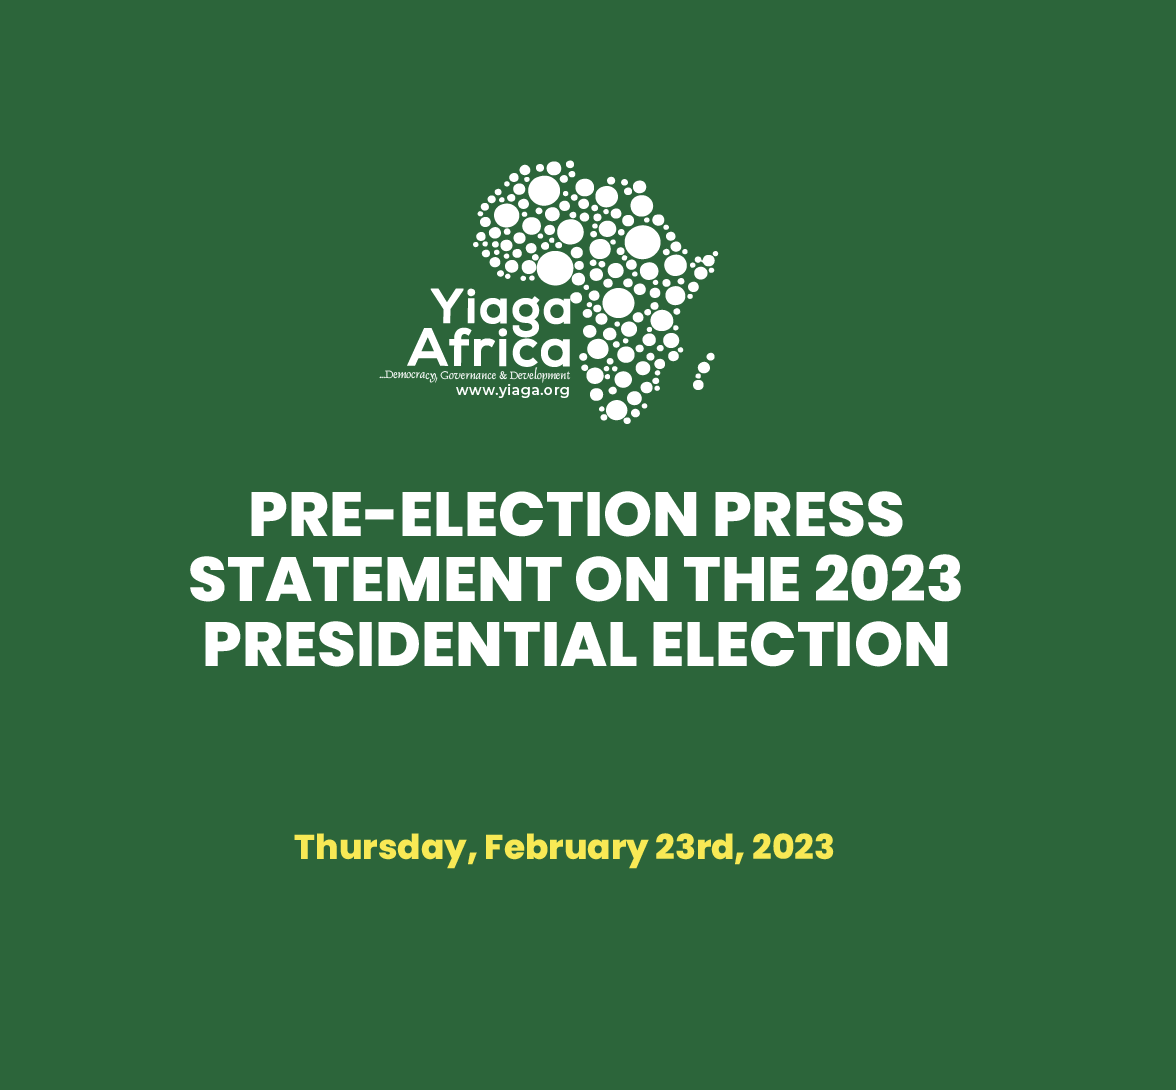 Pre Election press statement on the 2023 presidential election in Nigeria